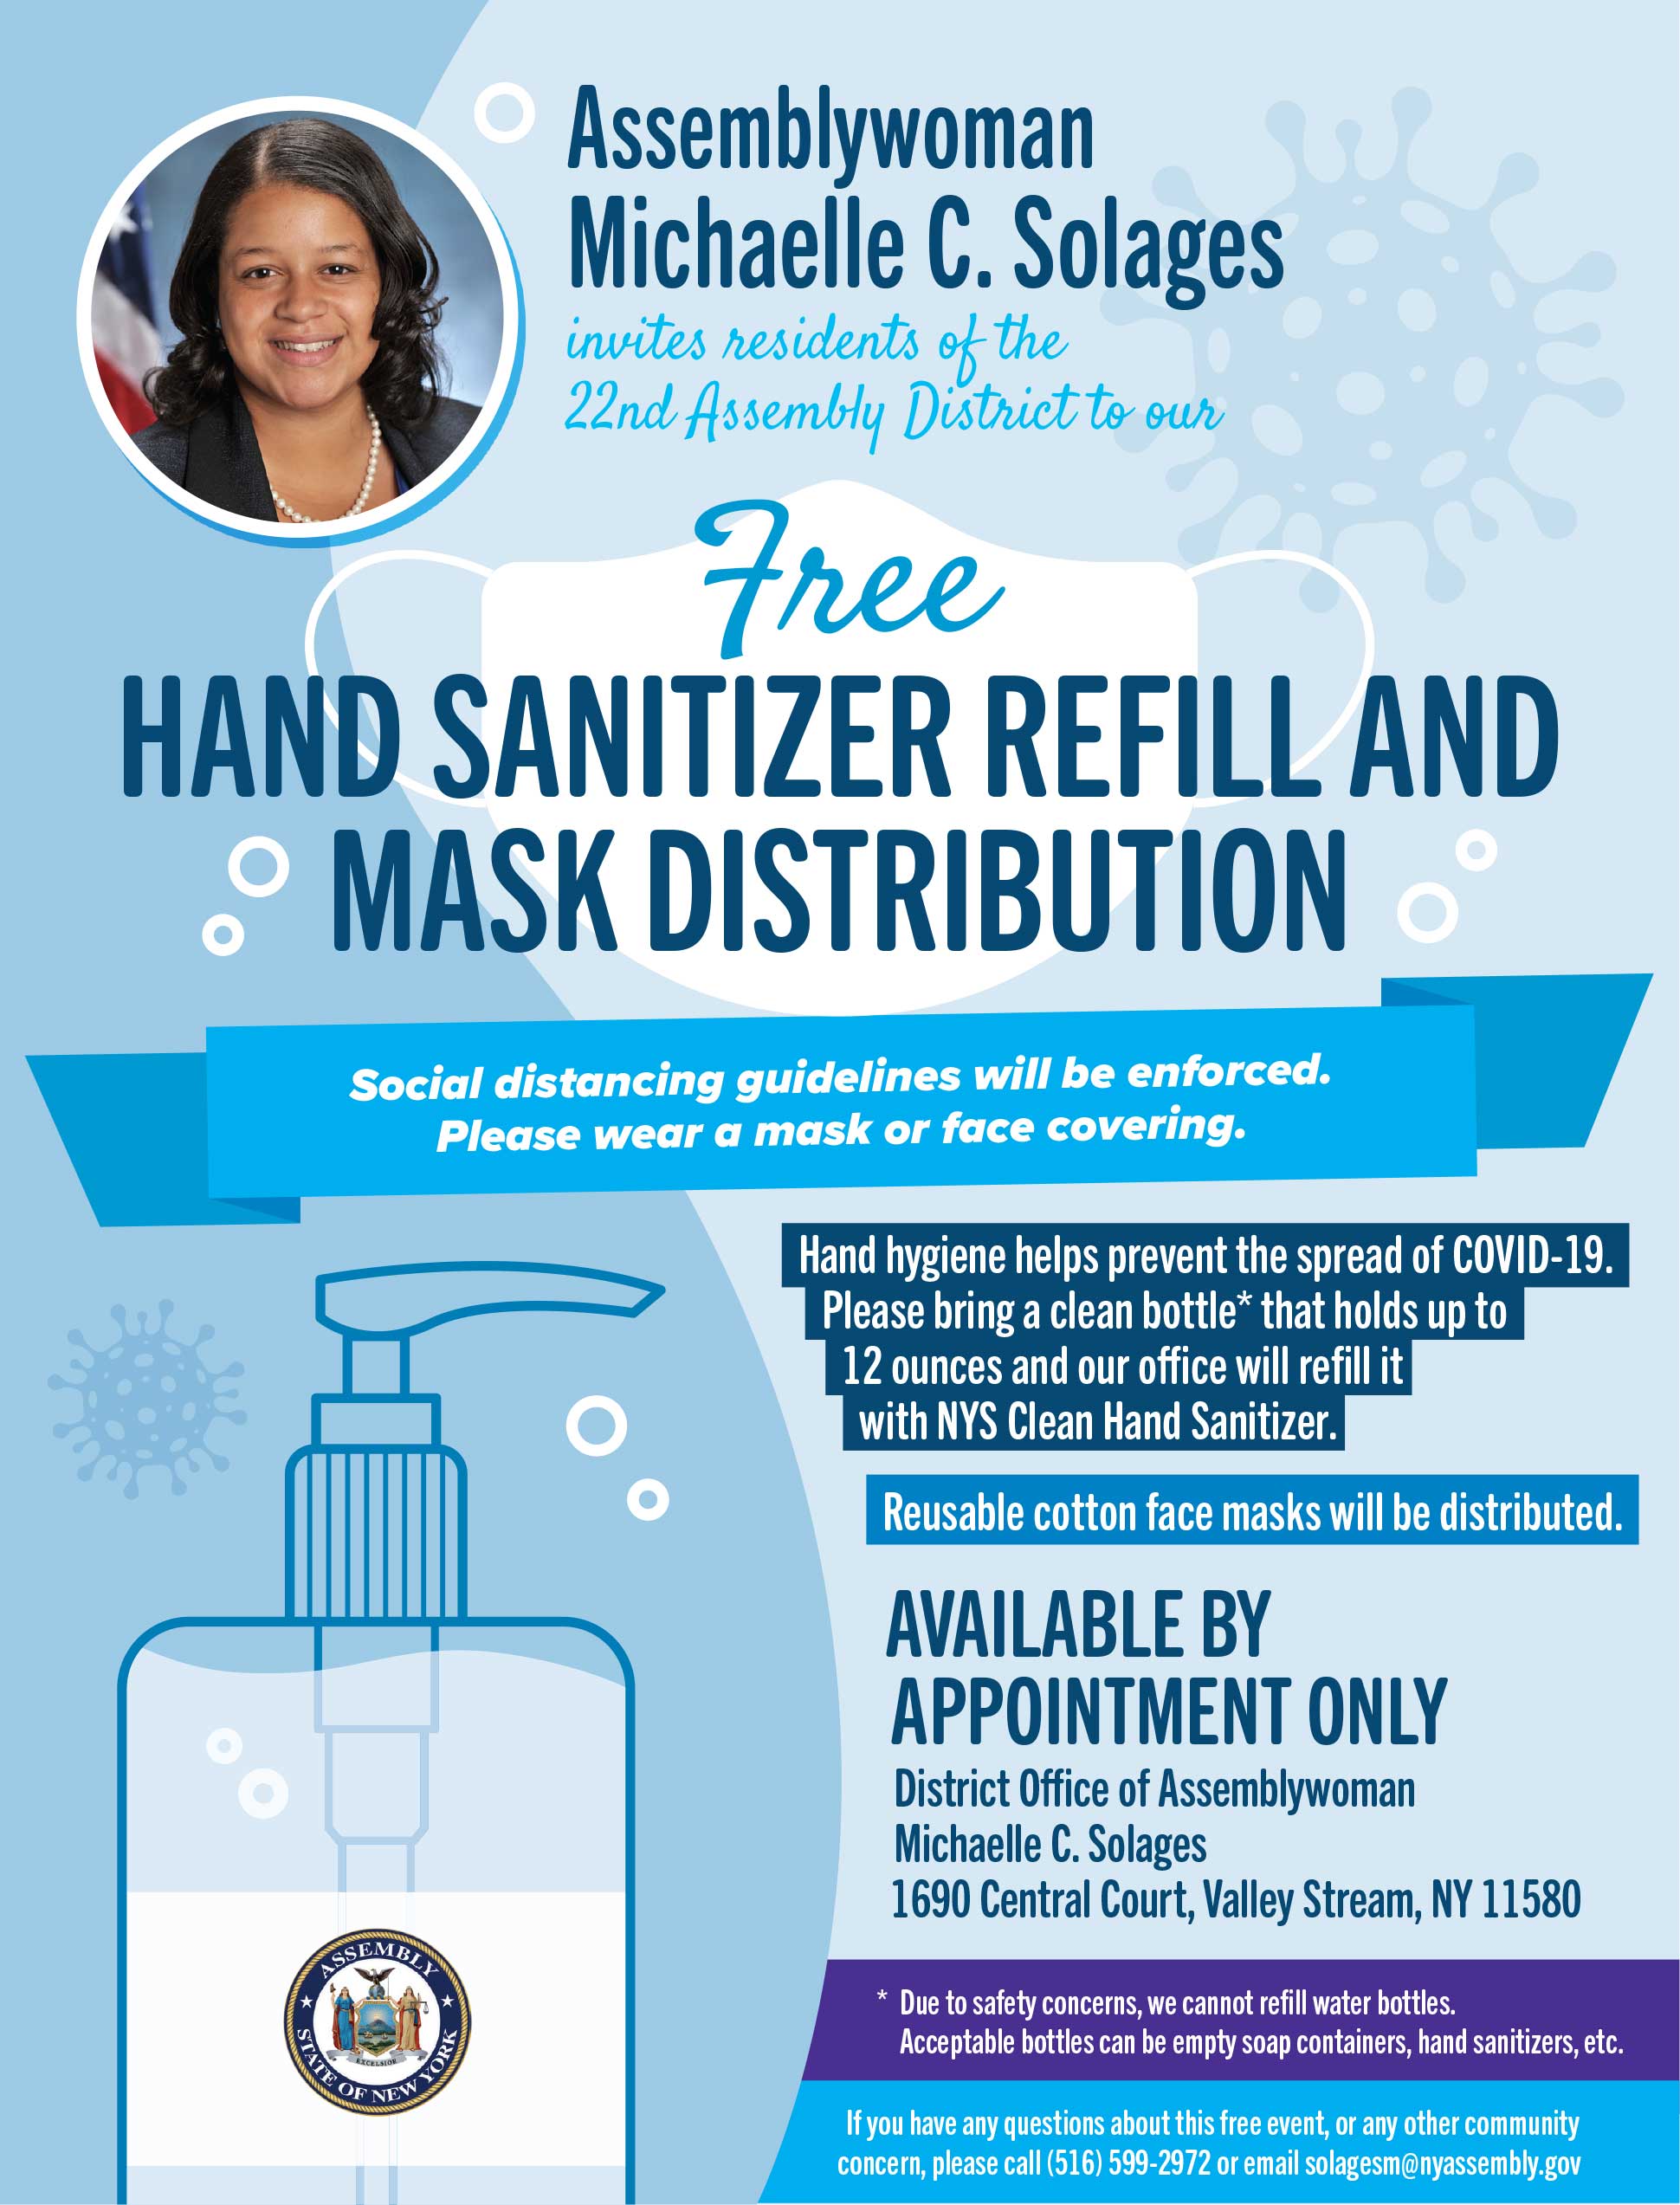 Hand Sanitizer Refill and Mask Distribution